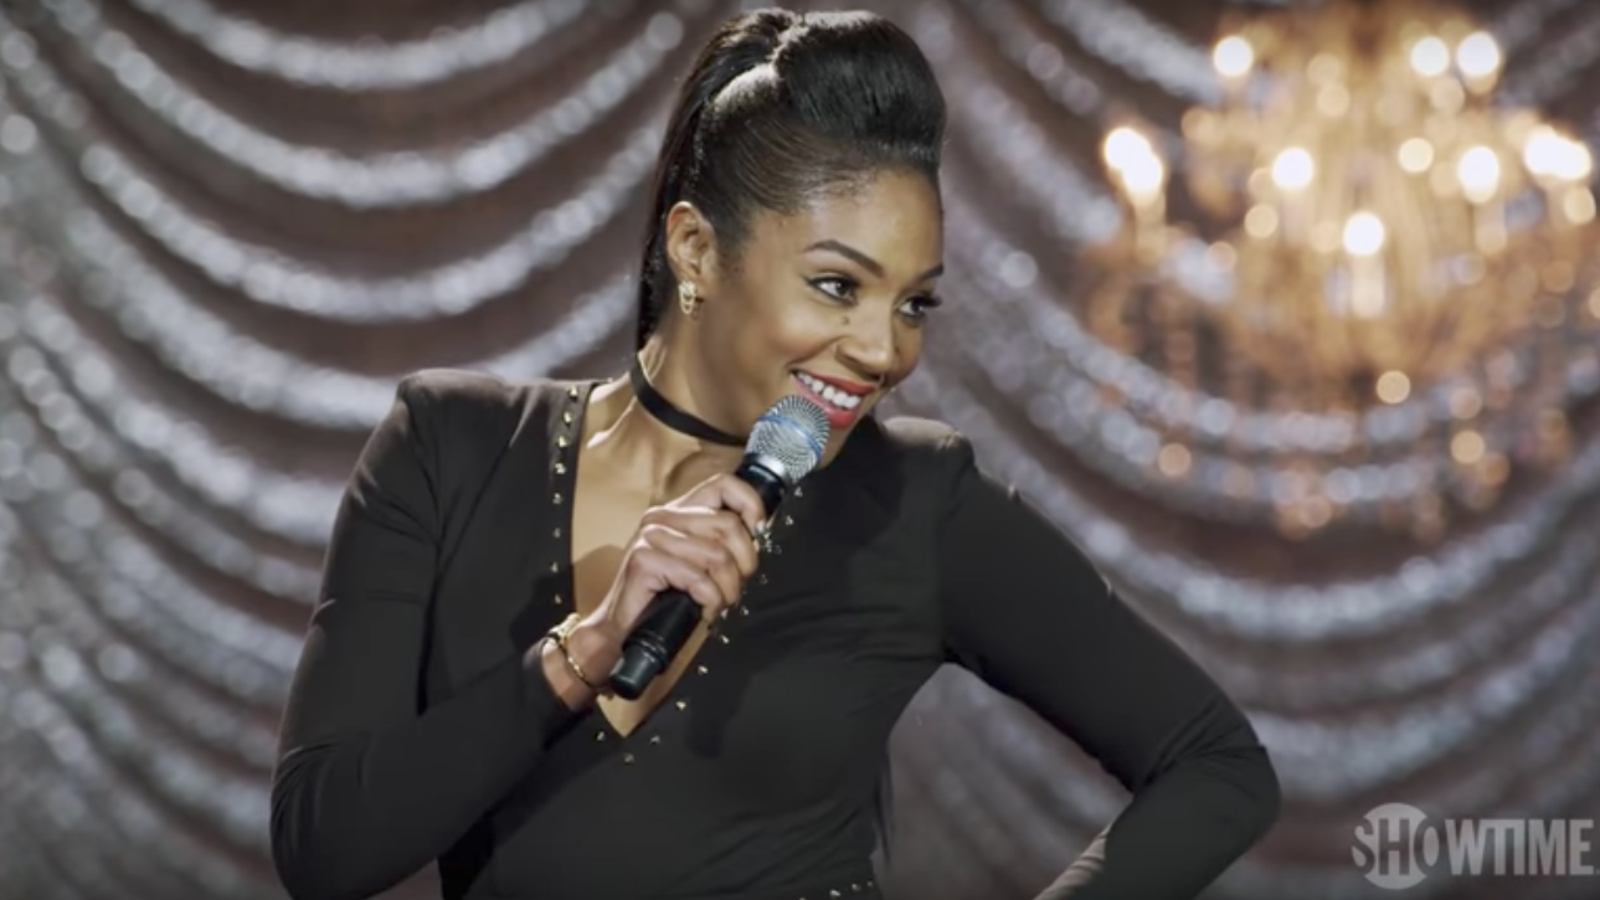 Tiffany Haddish Delivers HighStakes Comedy